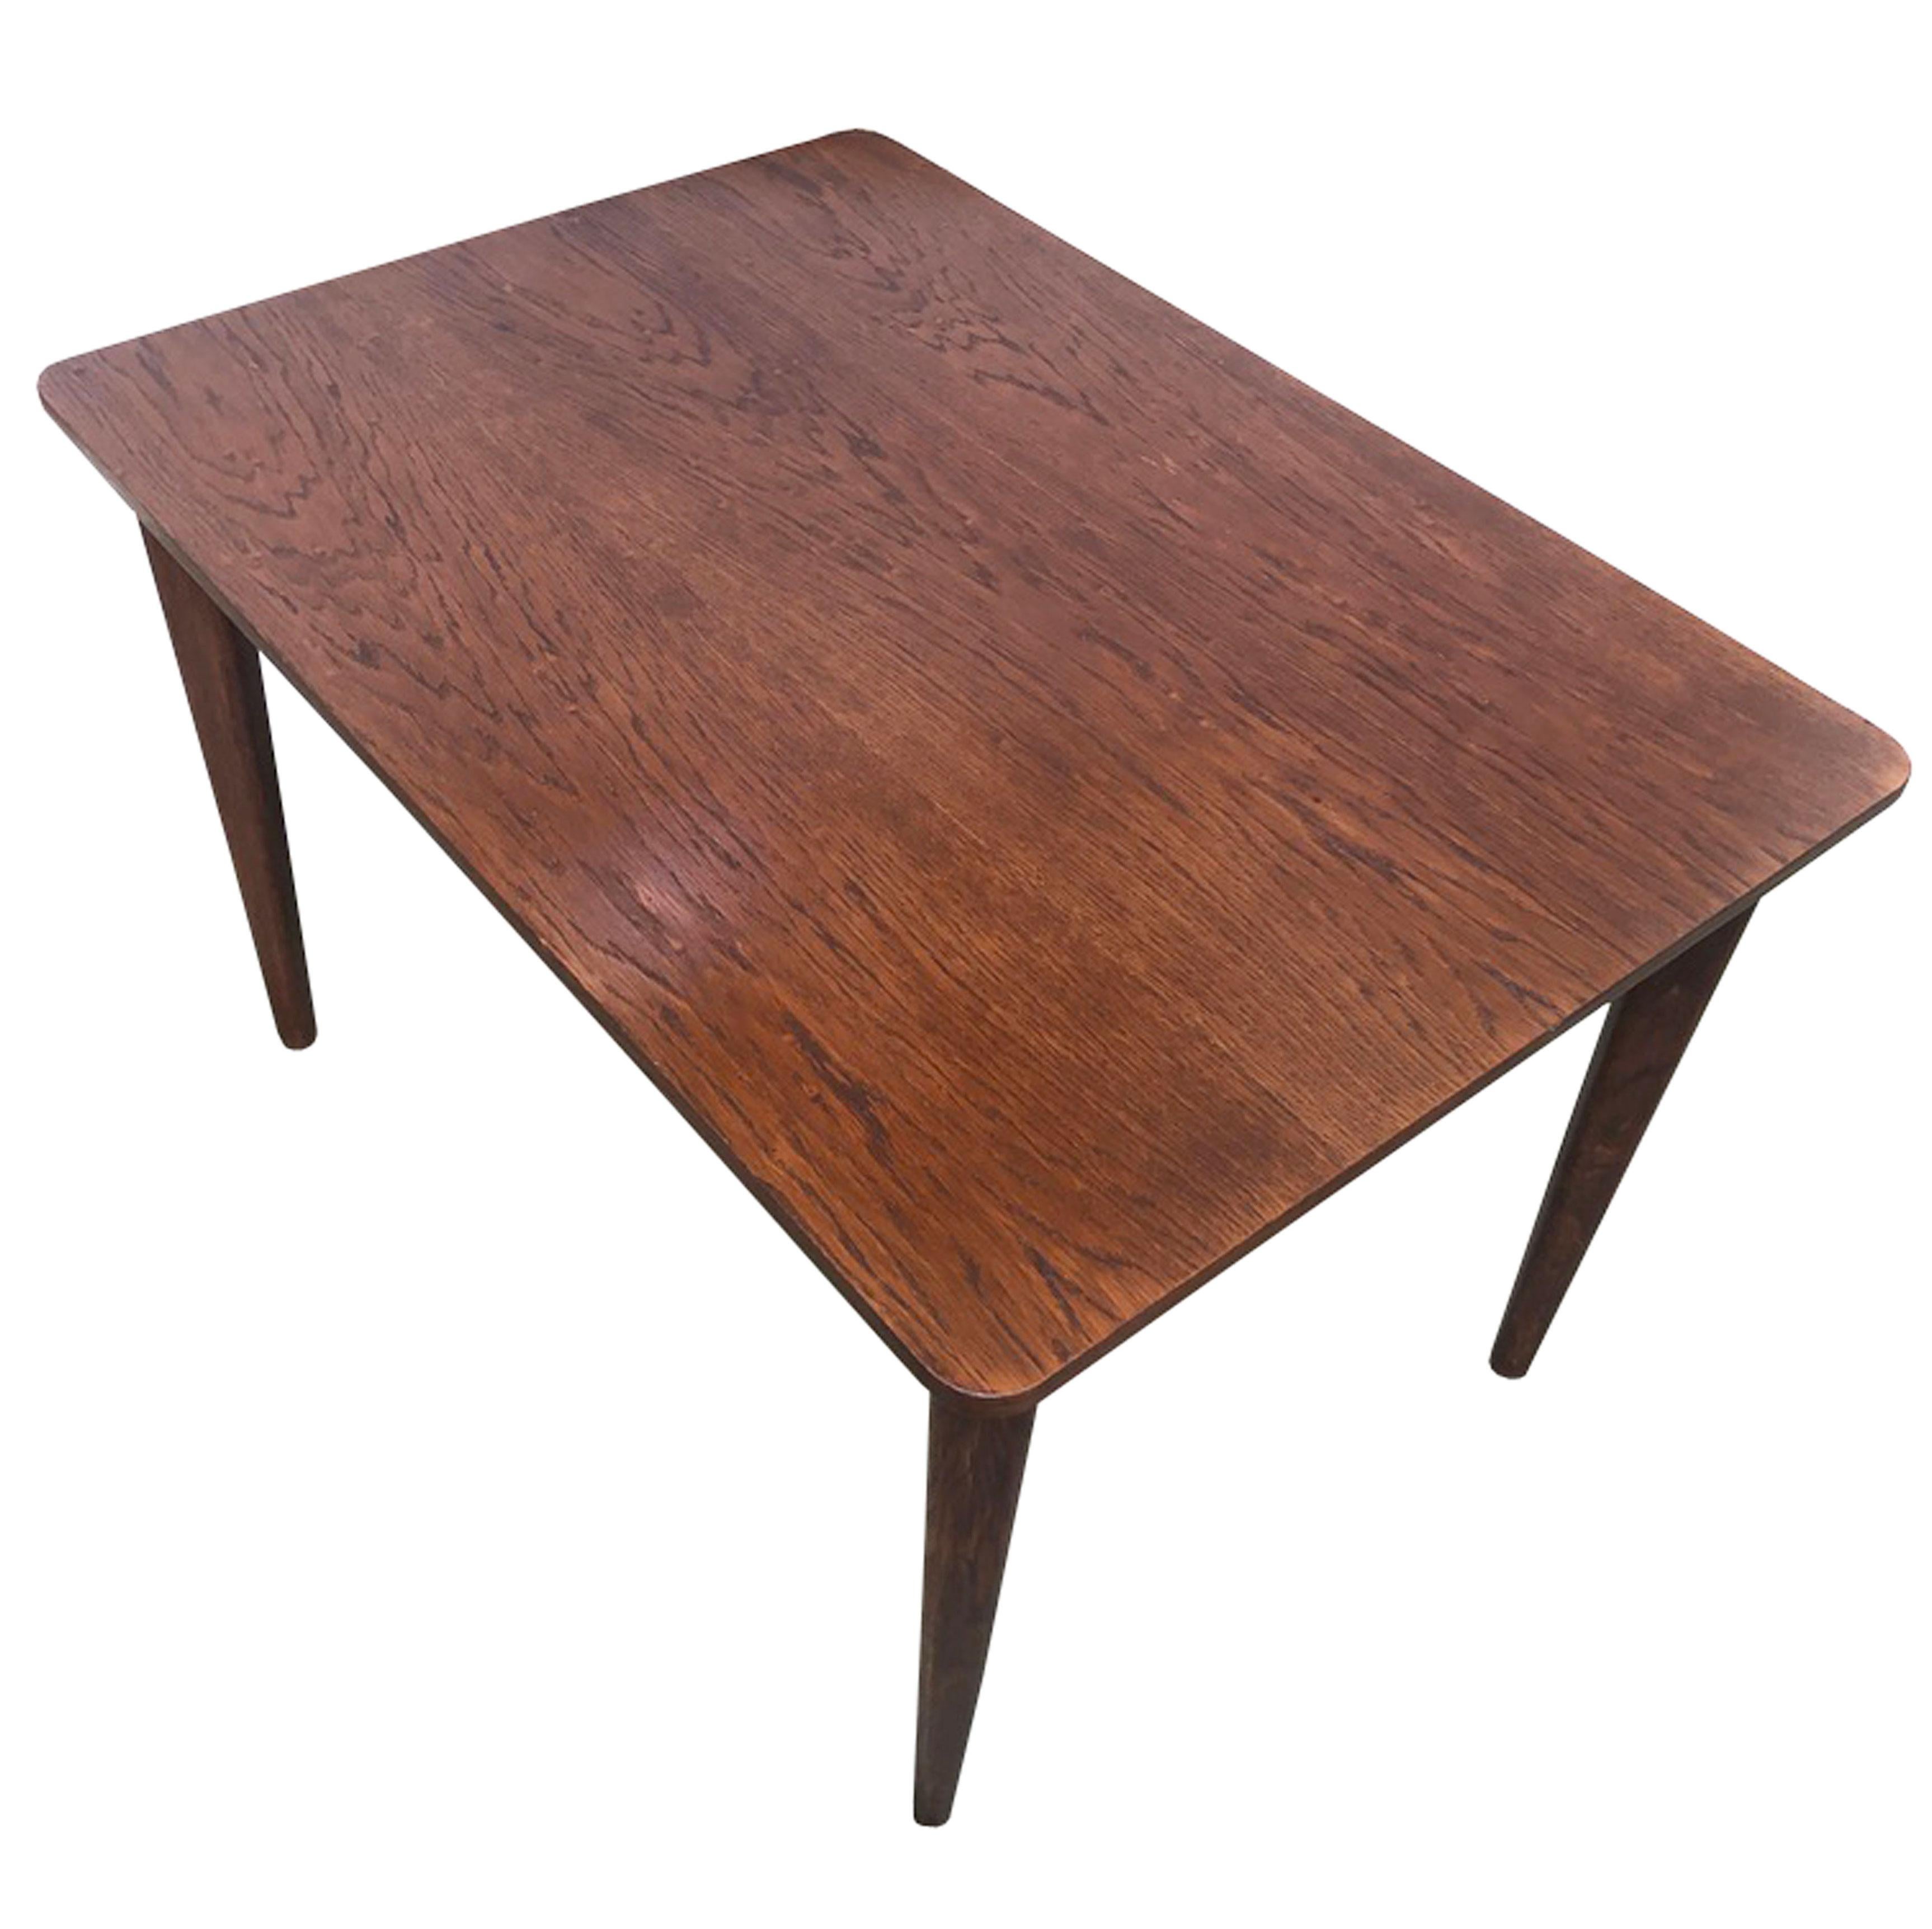 An original Mid Century dining table produced by UP Zavody, Czechoslovakia in 1963.

The table has been designed with elegant proportions and a careful attention to detail; gently curved corners and legs, precise joinery and a beautiful dark colour